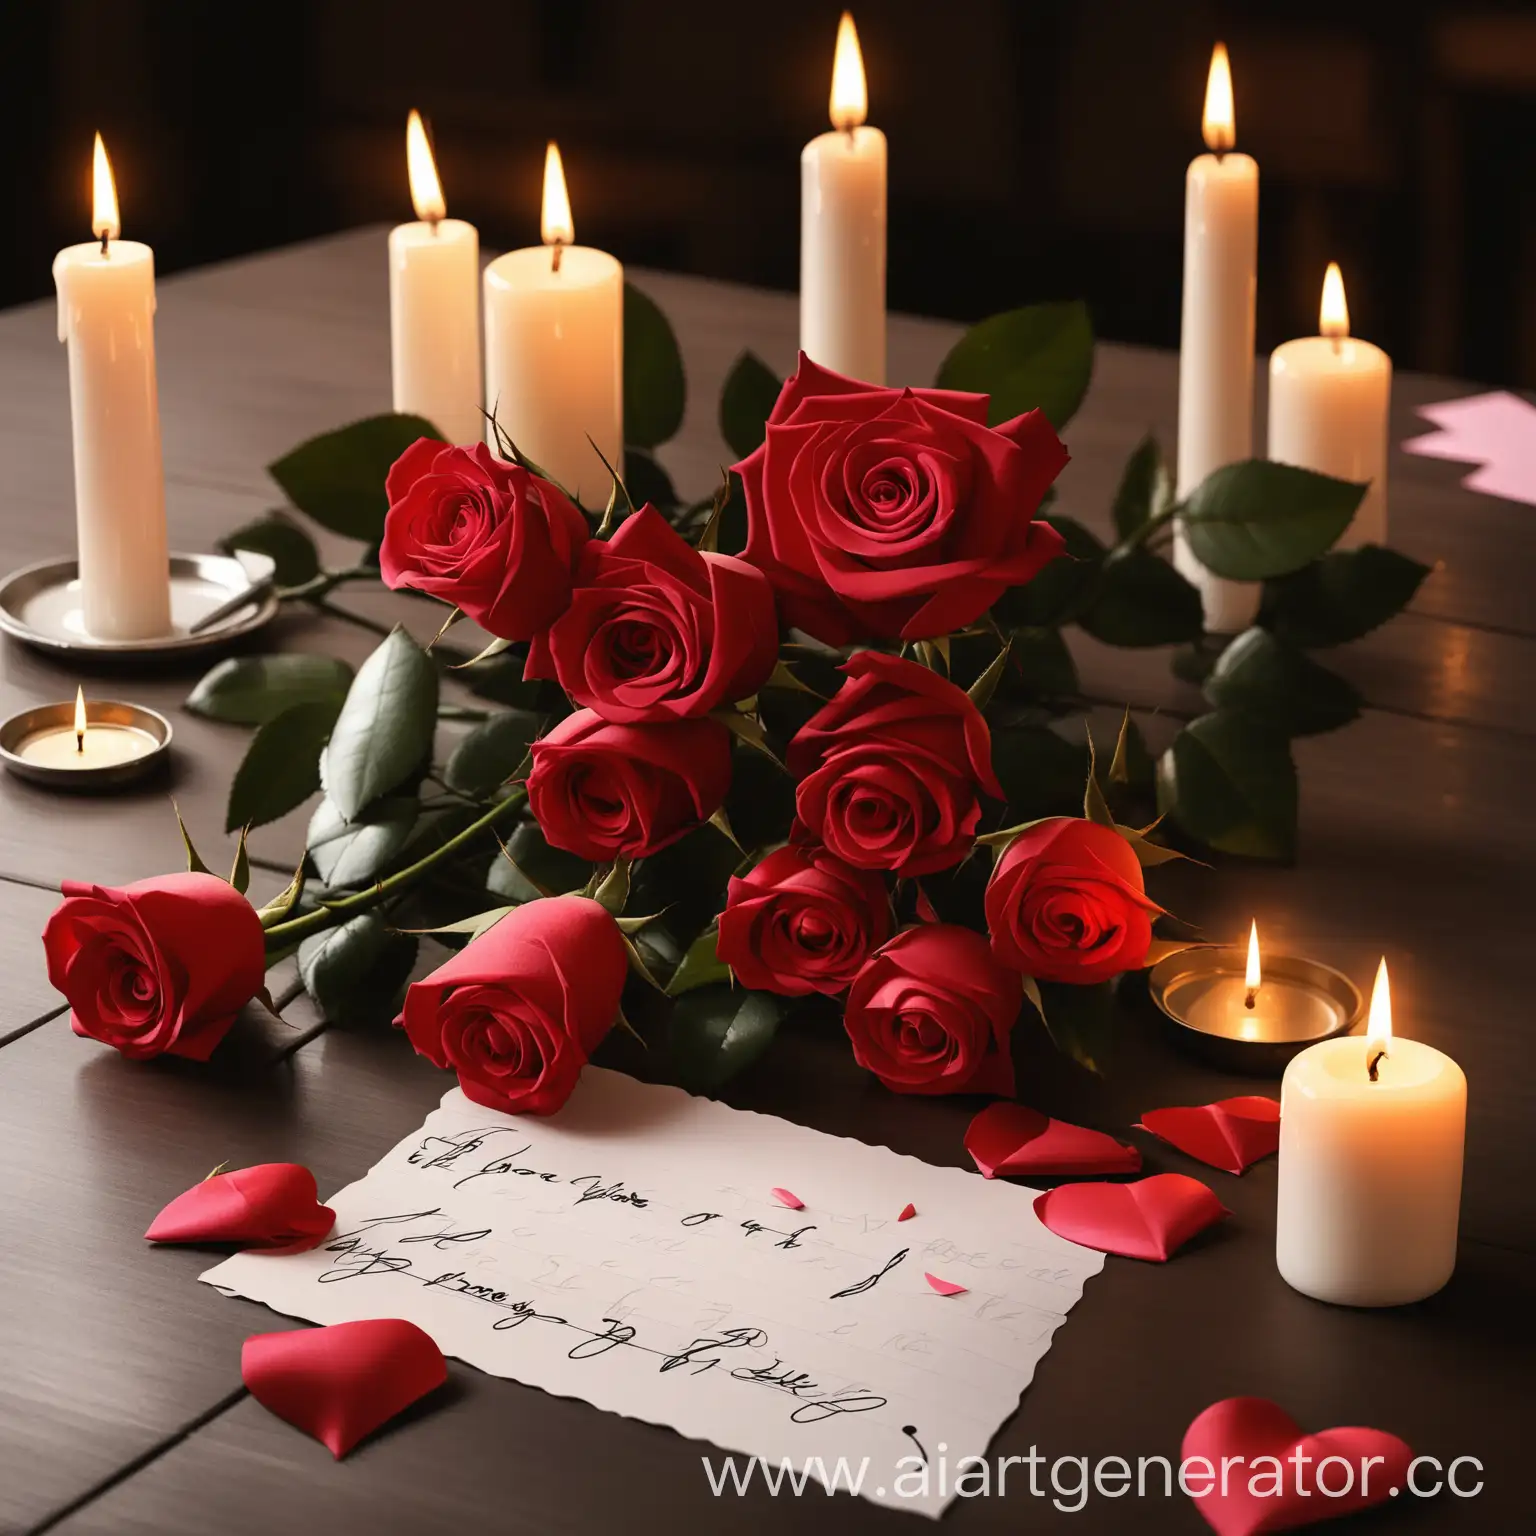 Romantic-Table-Setting-with-Roses-Candles-and-Love-Note